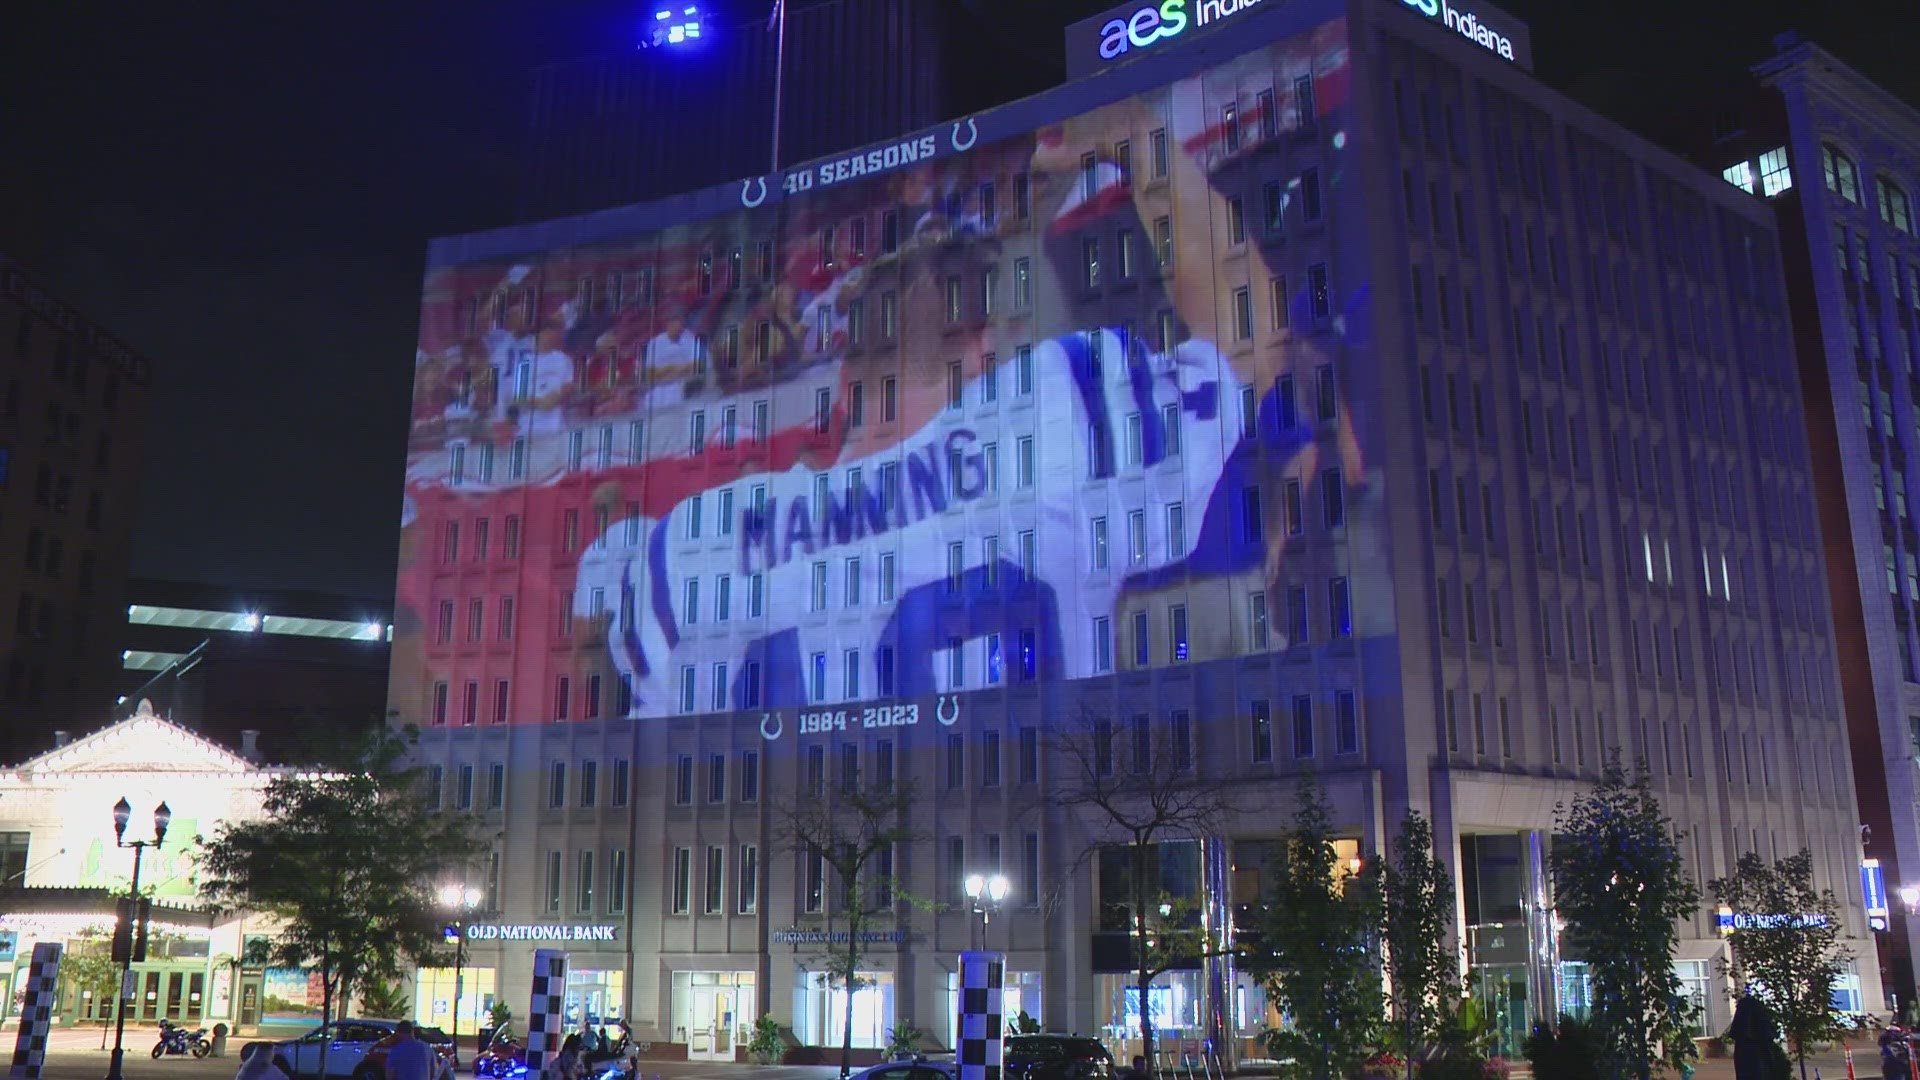 The new light show just opened on Monument Circle.